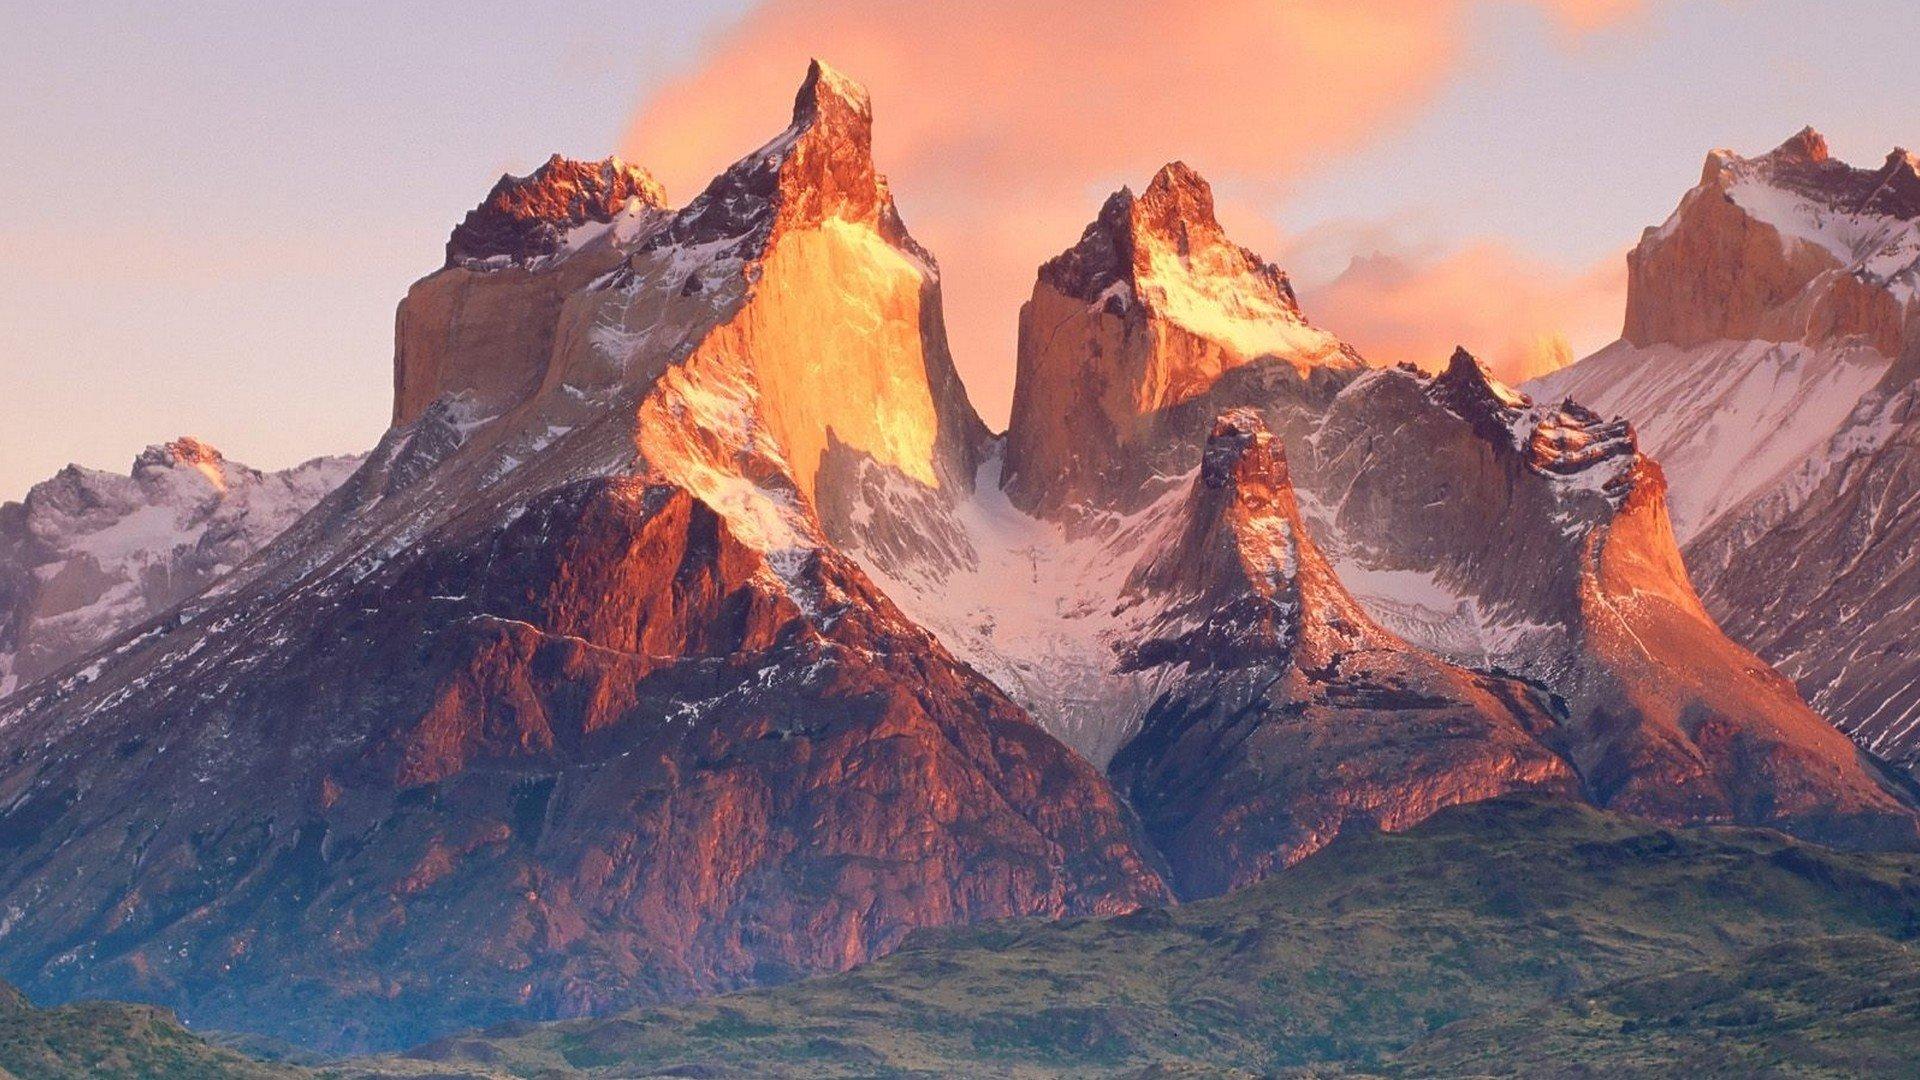 Patagonia HD Wallpapers - Top Free Patagonia HD Backgrounds ...